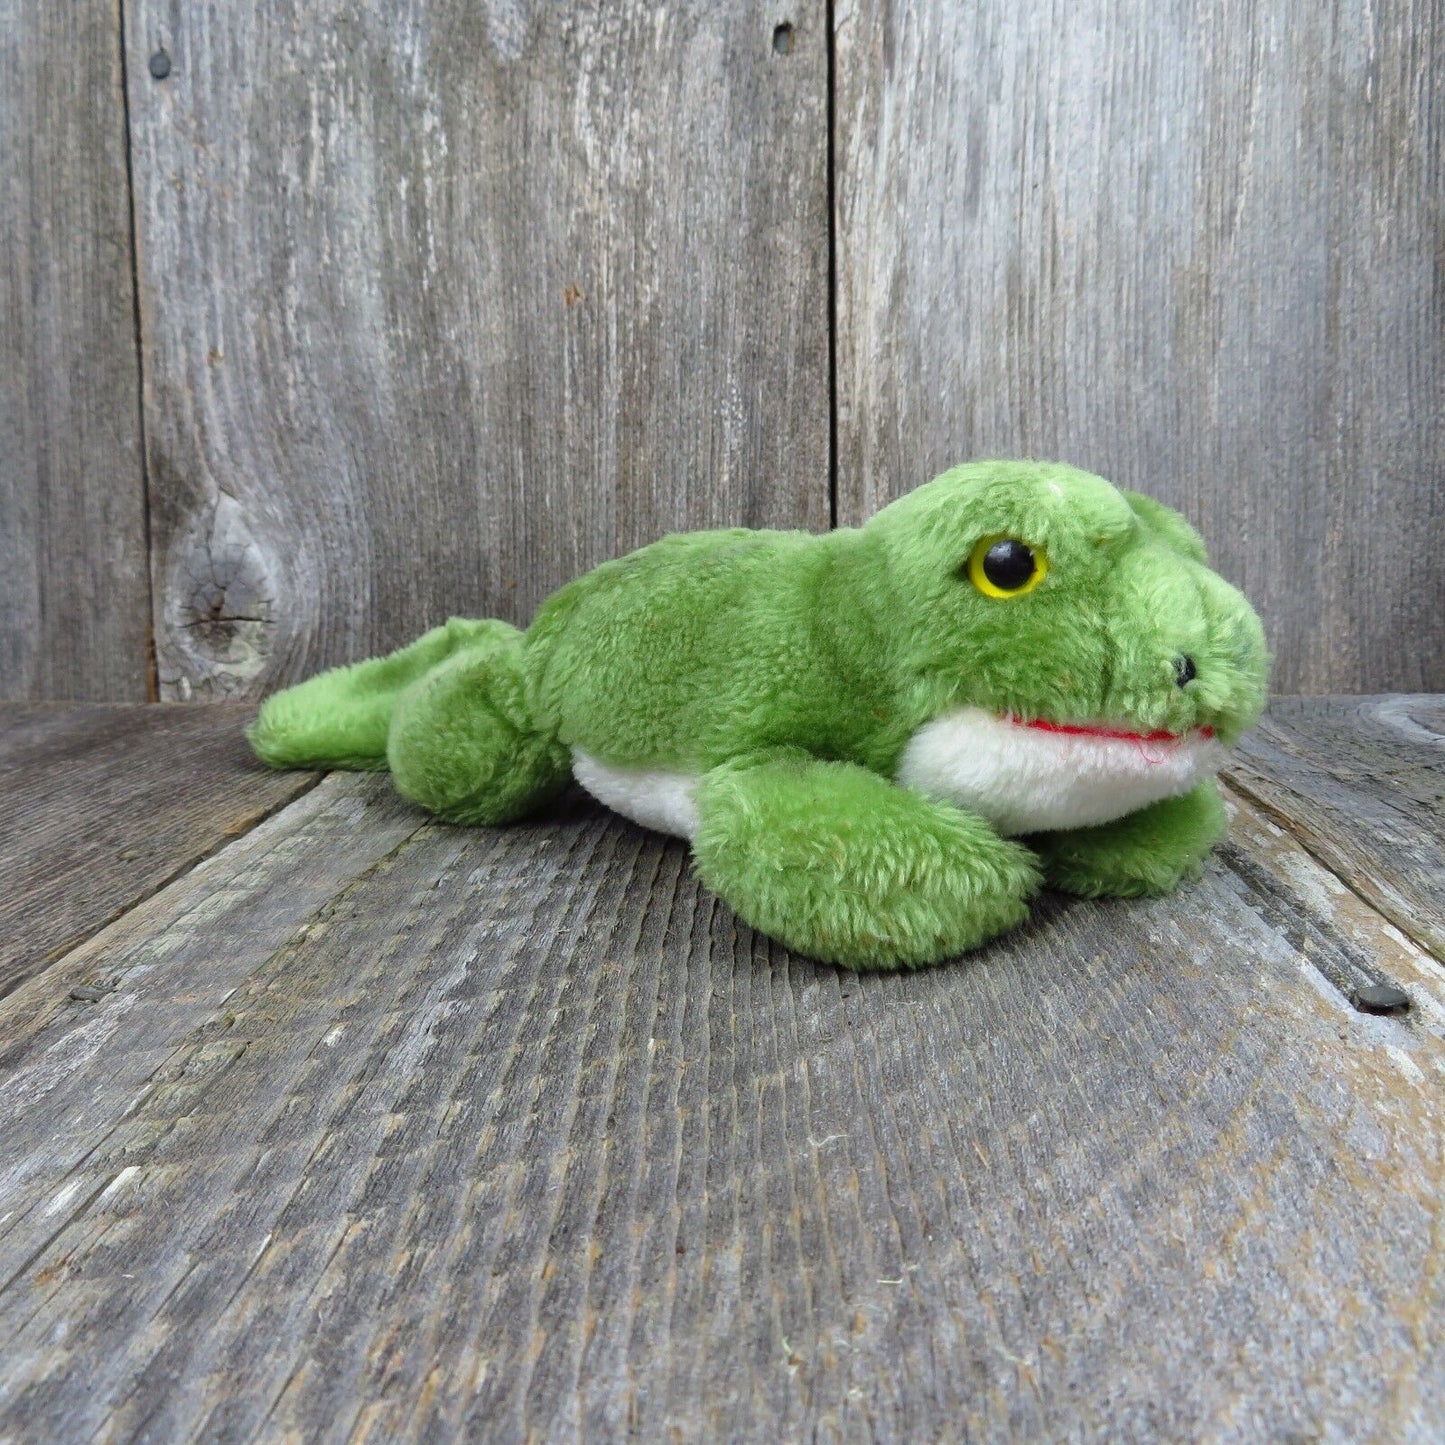 Frog Toad Plush Vintage Dakin Stuffed Animal Toy Doll Nut Filled Green 1976 - At Grandma's Table